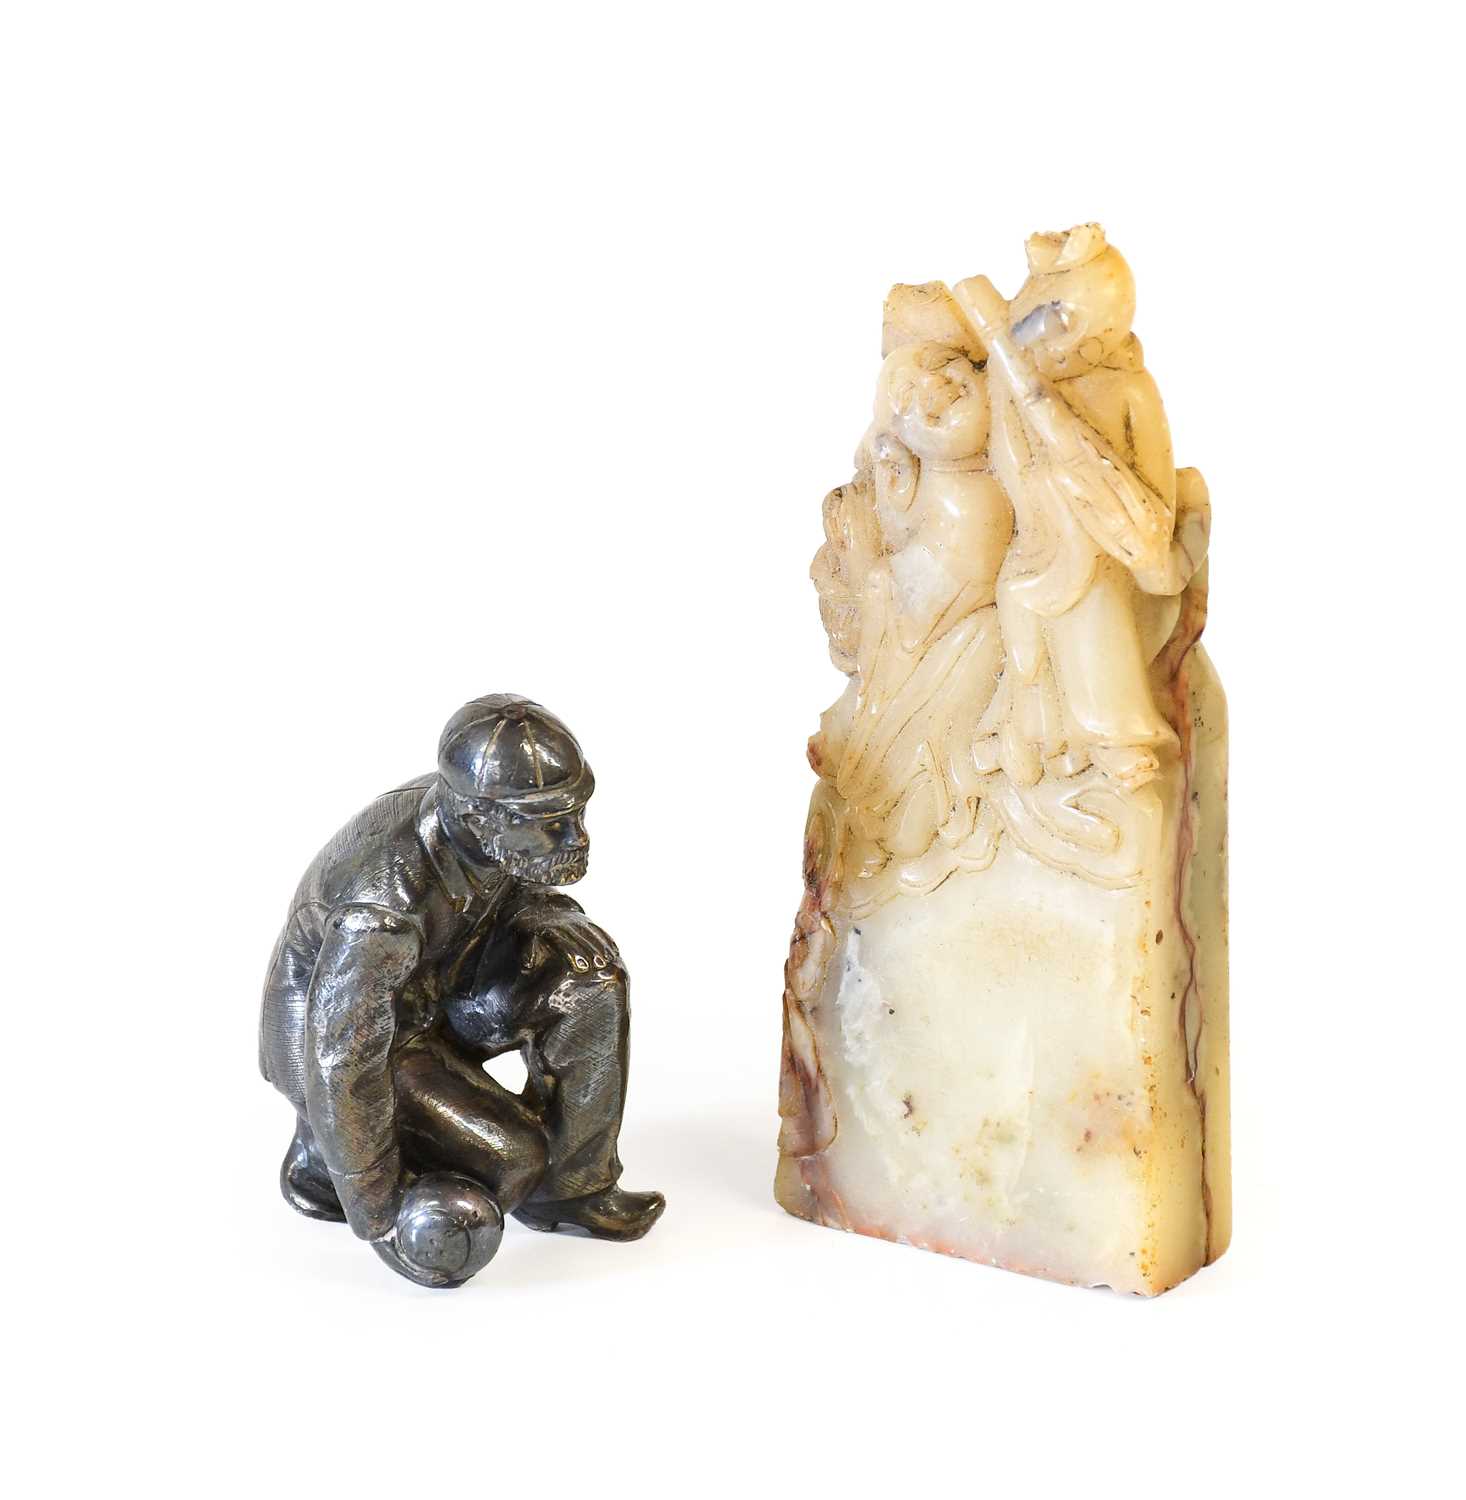 A Chinese Soapstone Hand Seal, late Qing Dynasty, carved with figures on a rectangular base